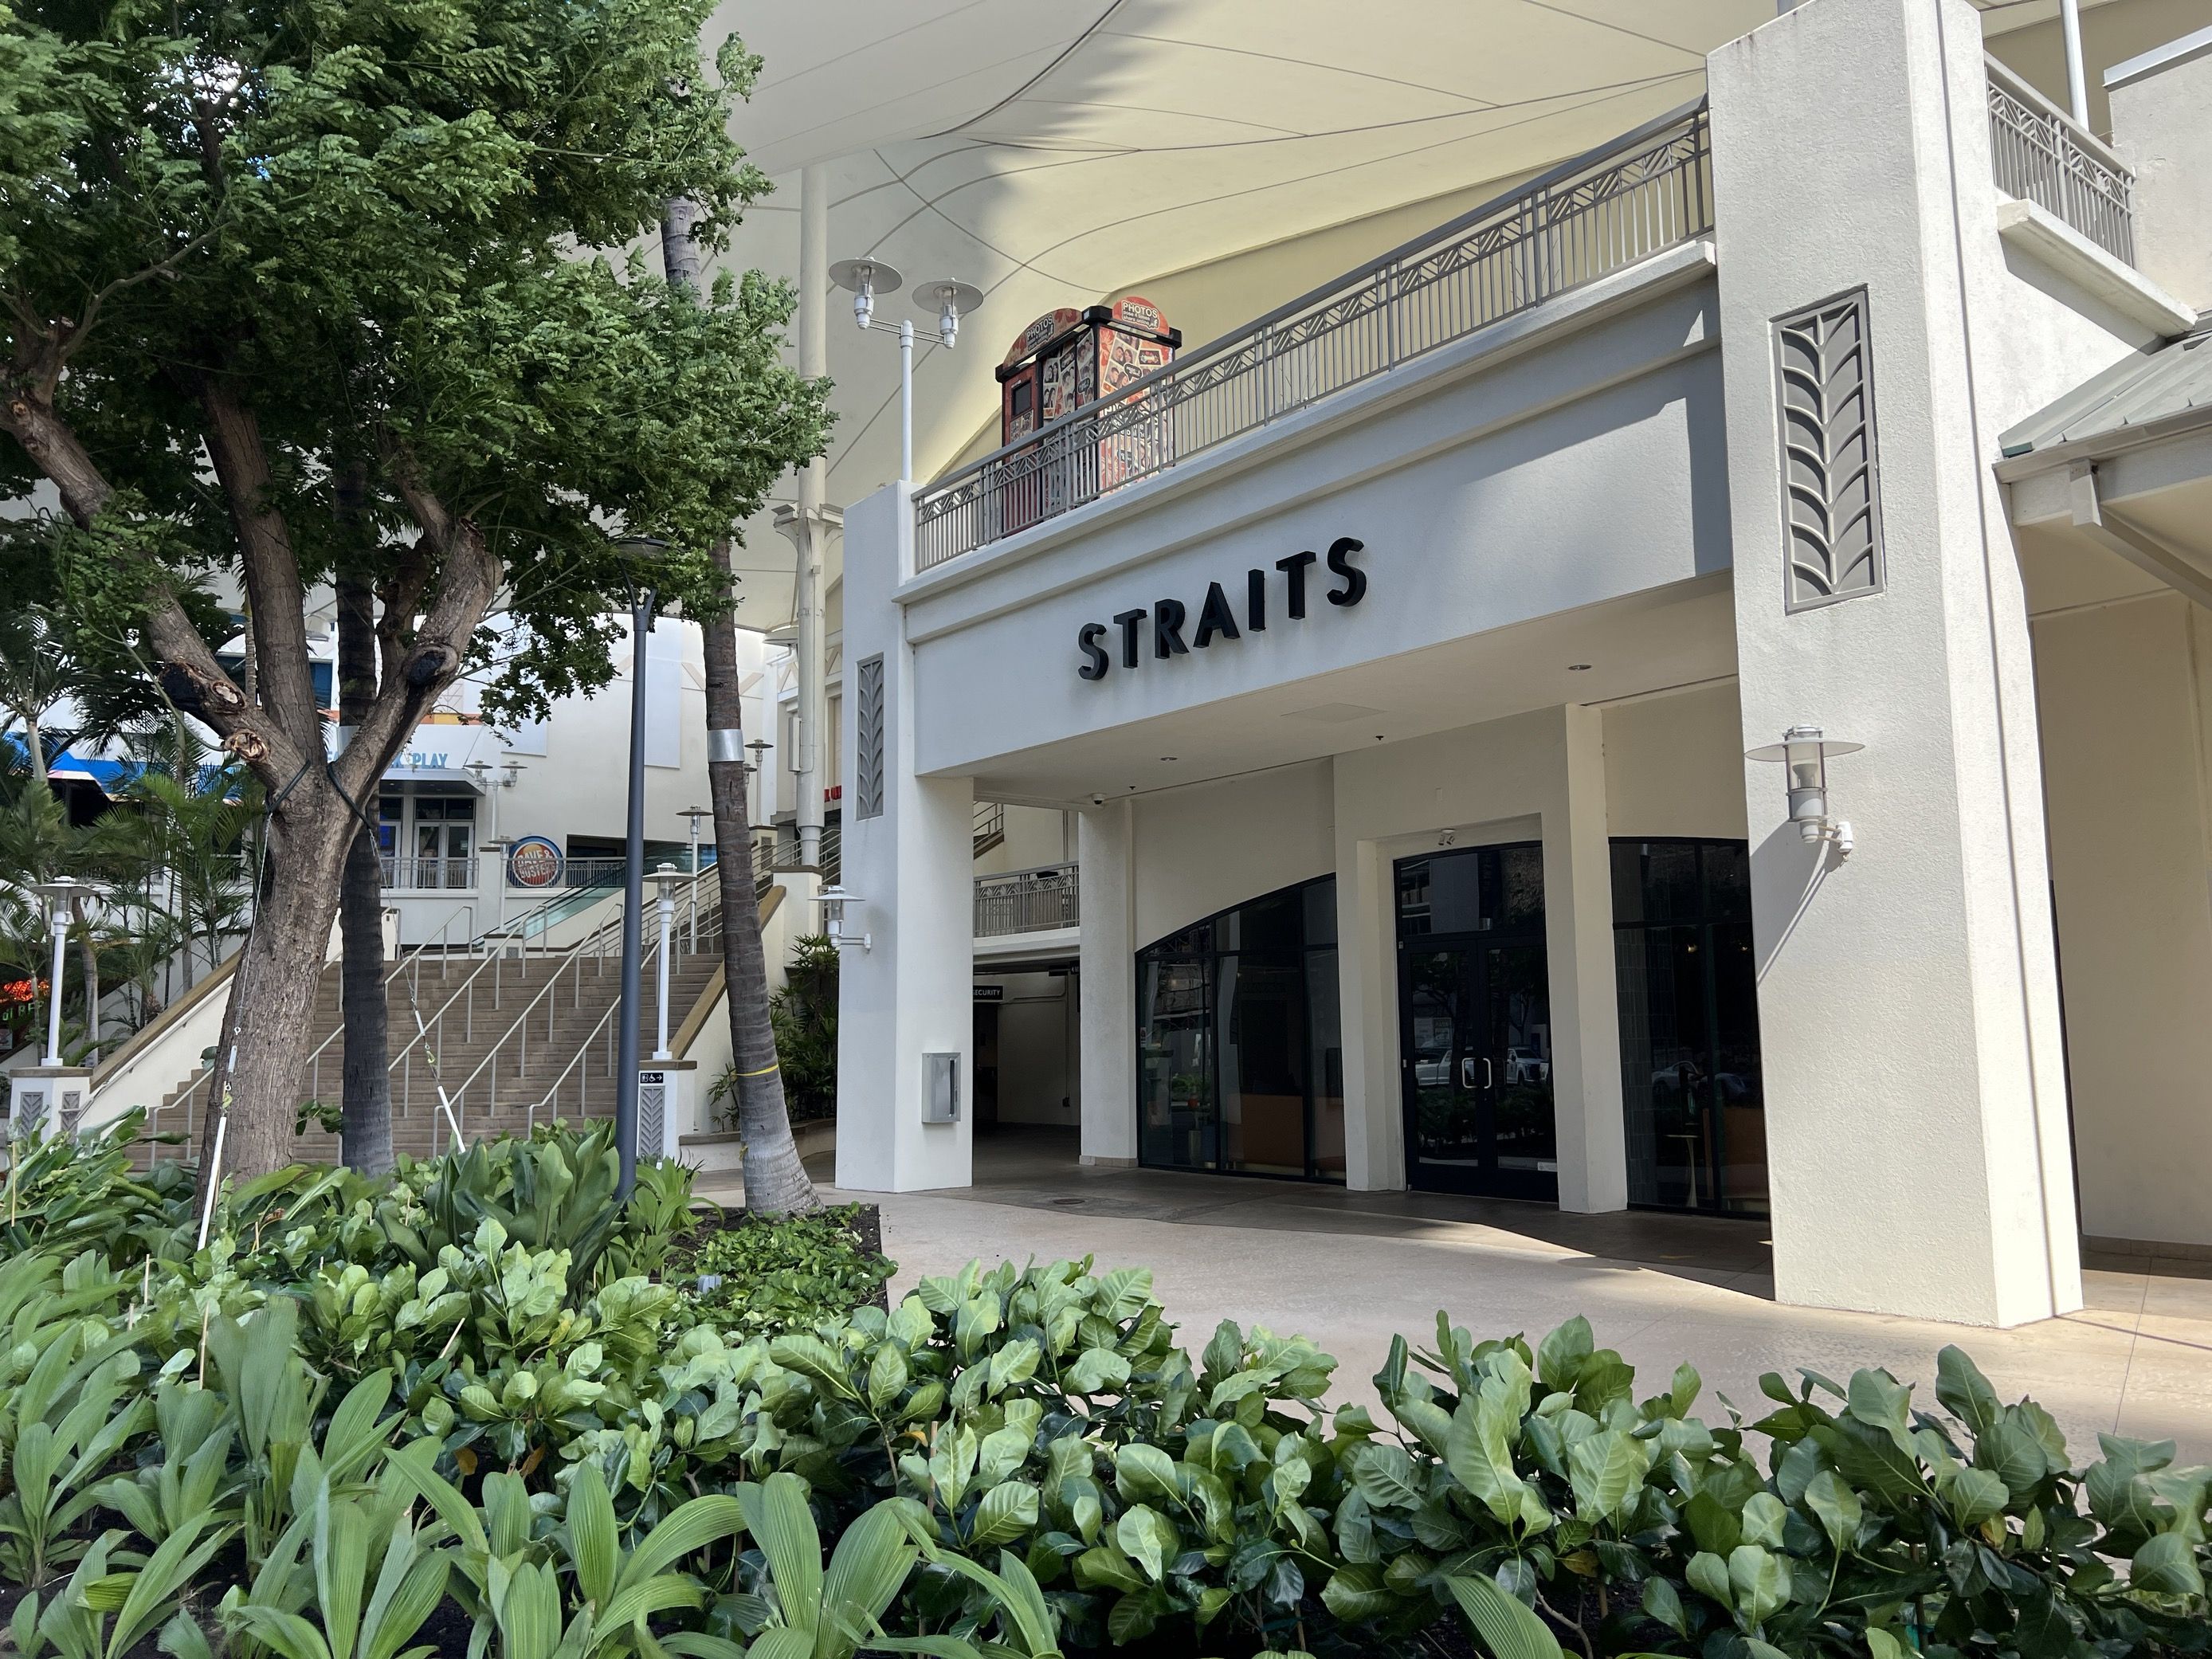 Founded in San Francisco, Straits Hawai'i is the restaurant's first location in the islands where friends and family can share globally-inspired cuisine.